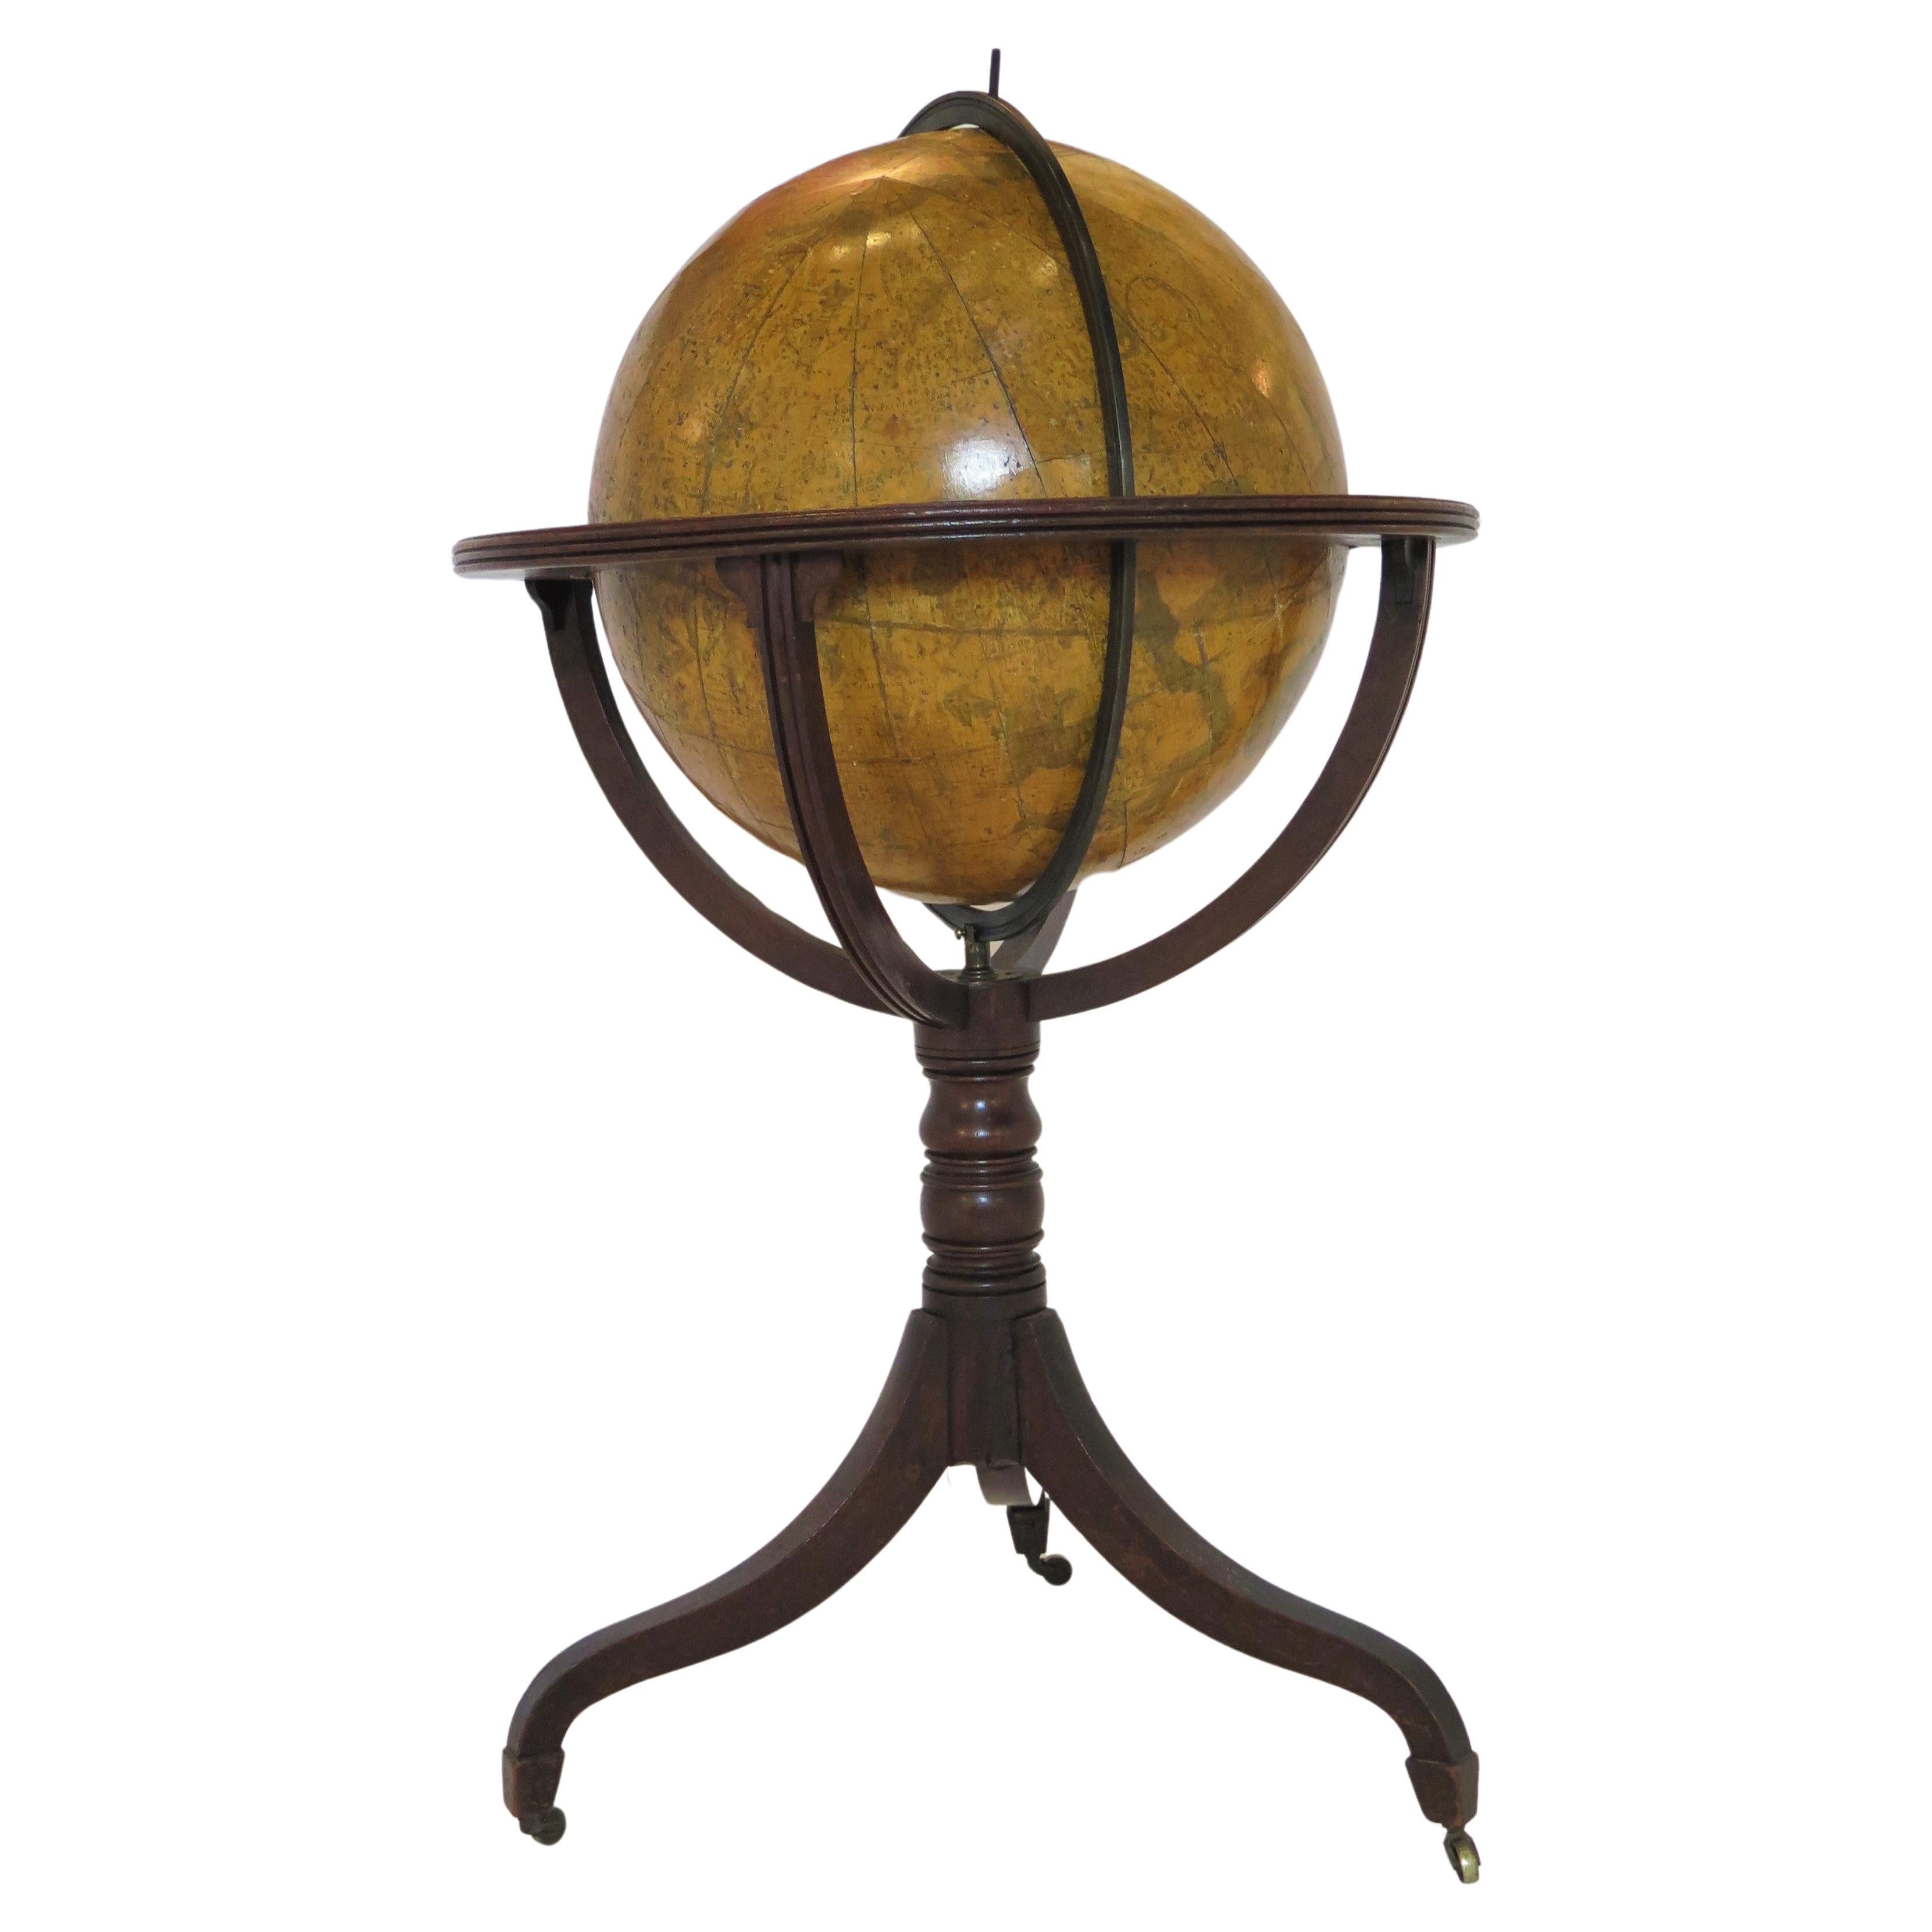 A George III eighteen inch celestial globe by W. and T.M. Bardin, dated 1800, in a mahogany tripod floor stand having graceful curved legs with brass caps and castors. the cartouche reads: to the  Rev. Nevil Maskelyne, D.D., F.R.S. Astronomer Royal,